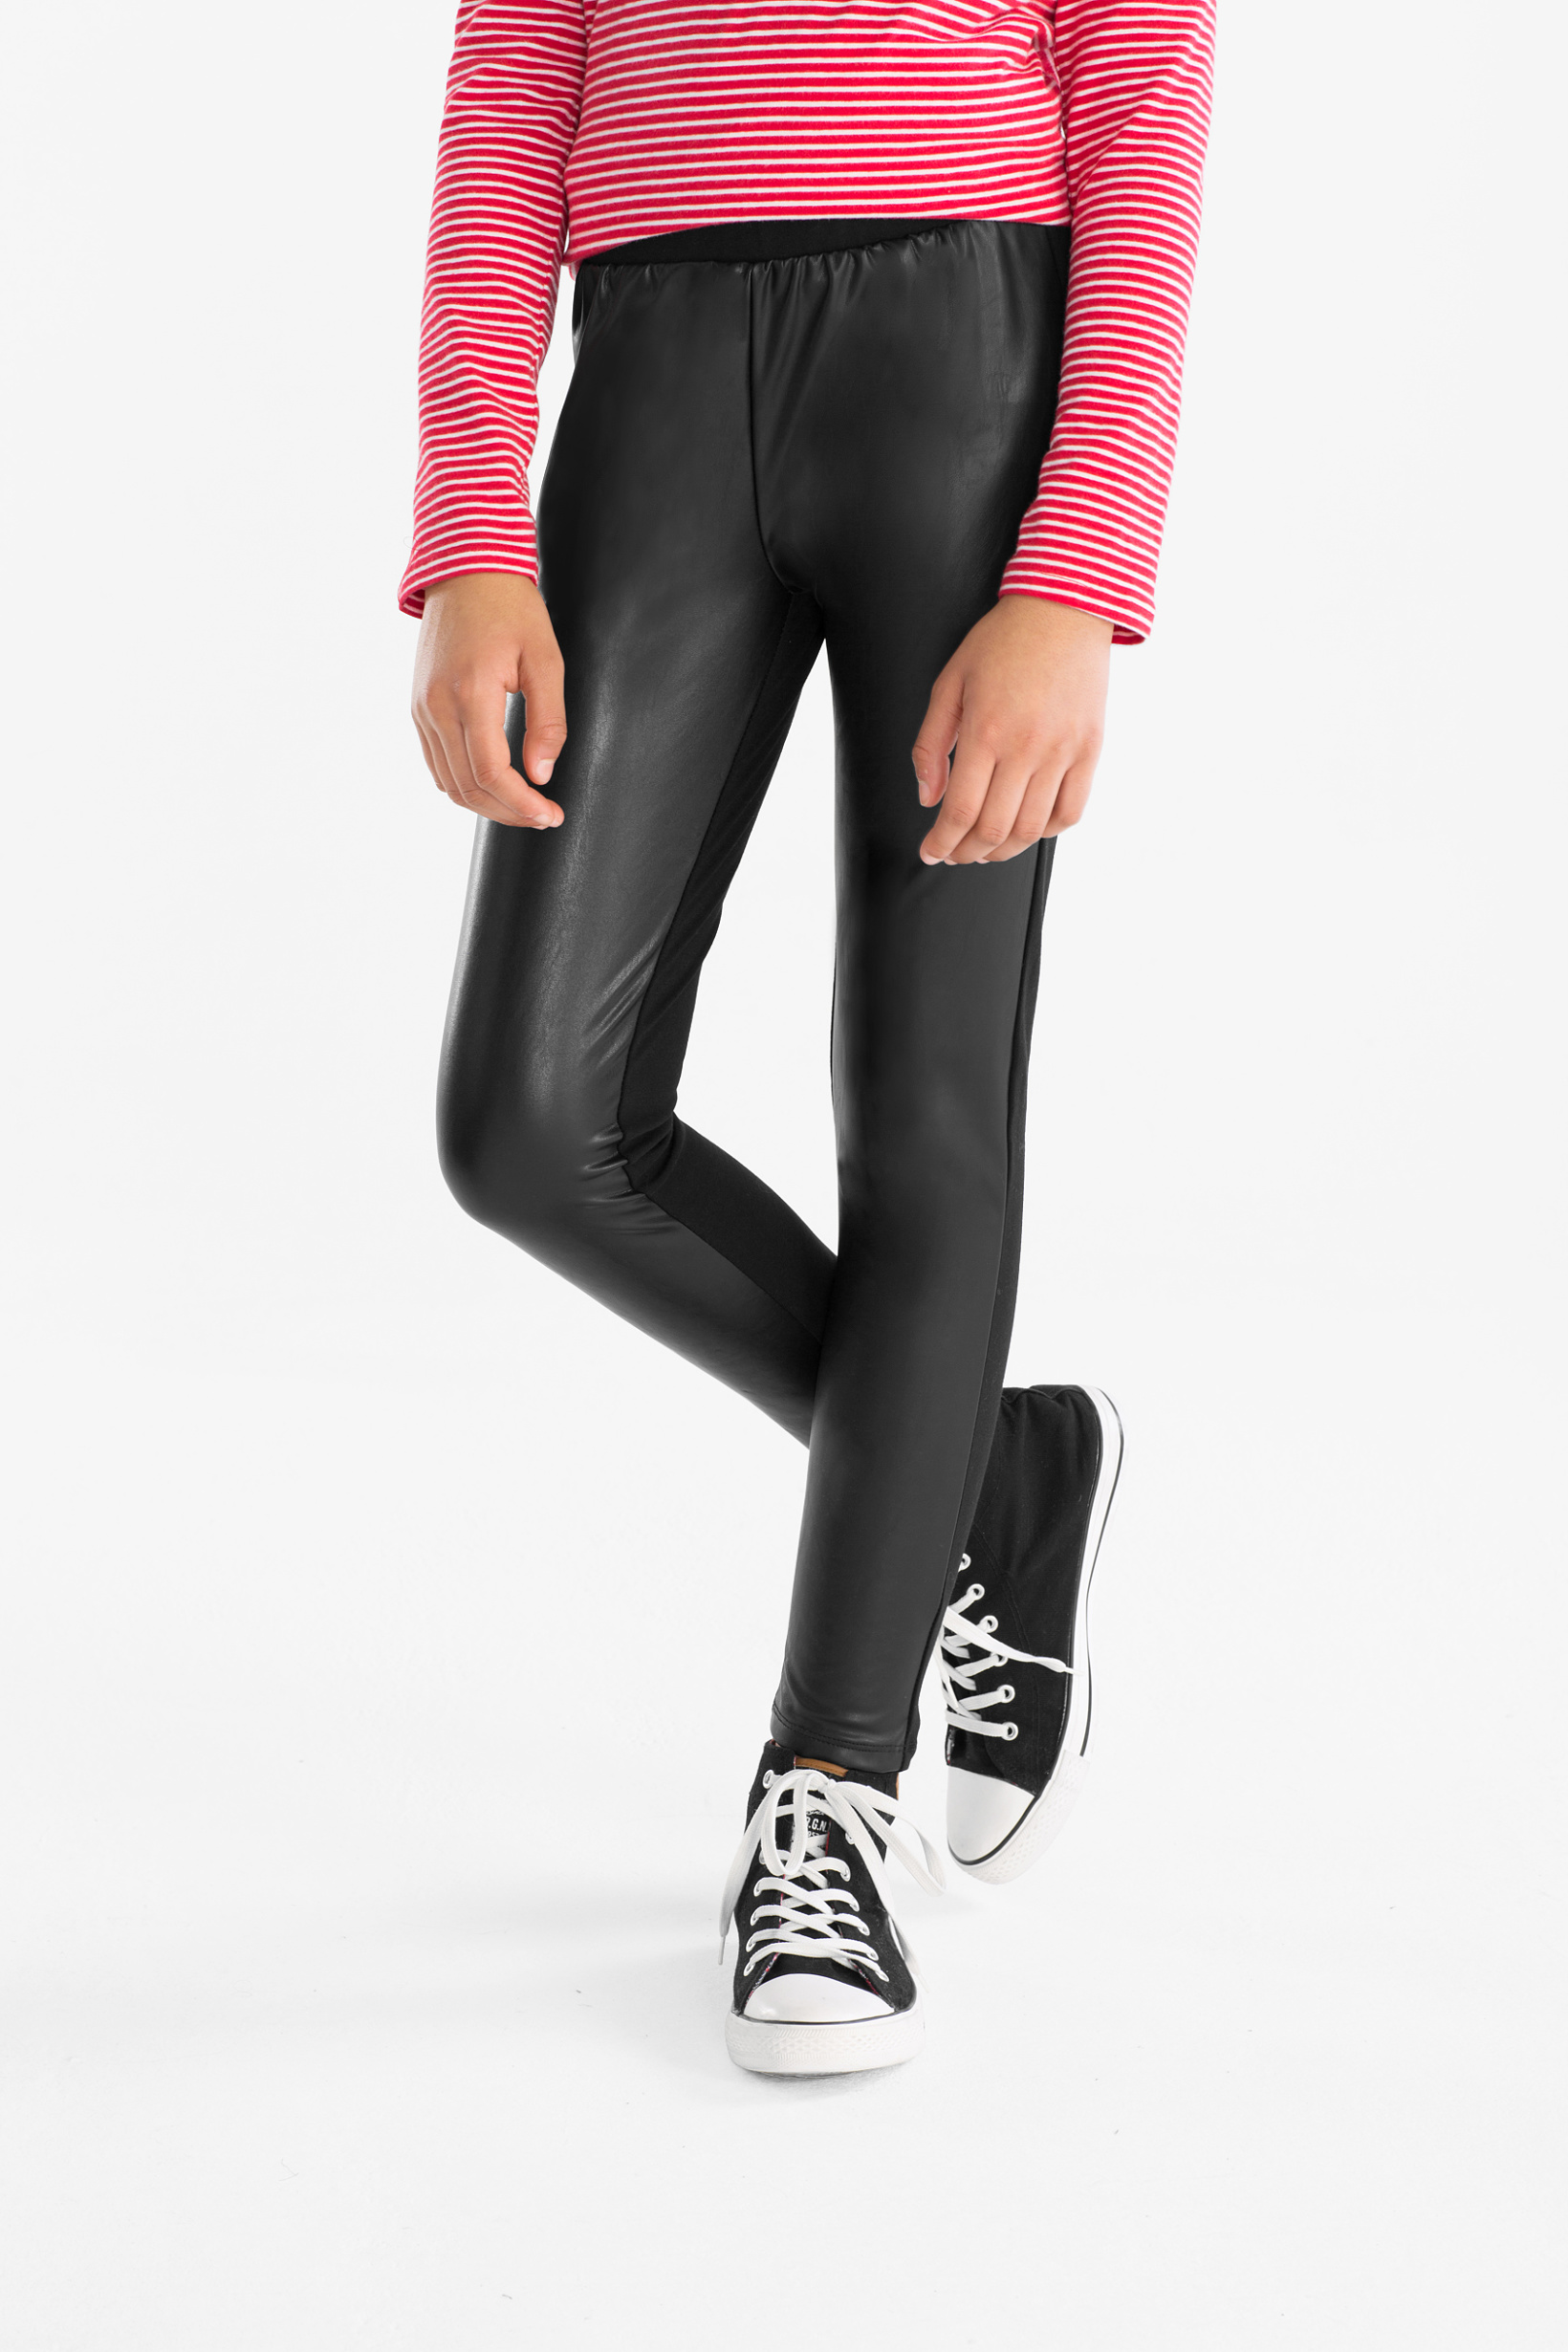 Here and There Legging